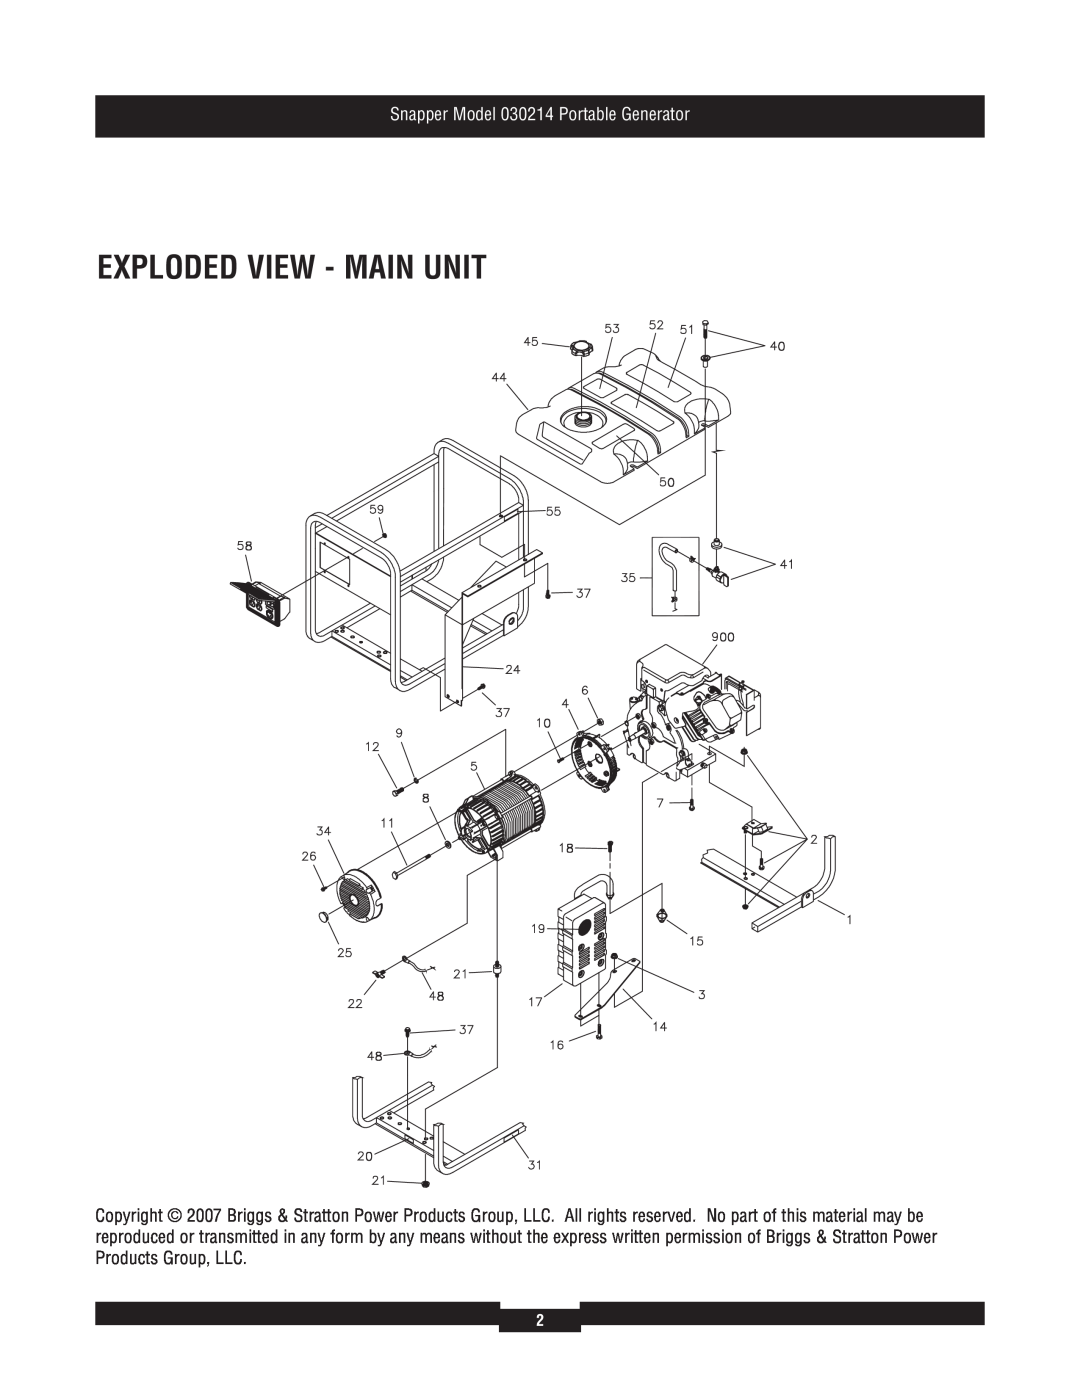 Snapper manual Exploded View - Main Unit, Snapper Model 030214 Portable Generator 